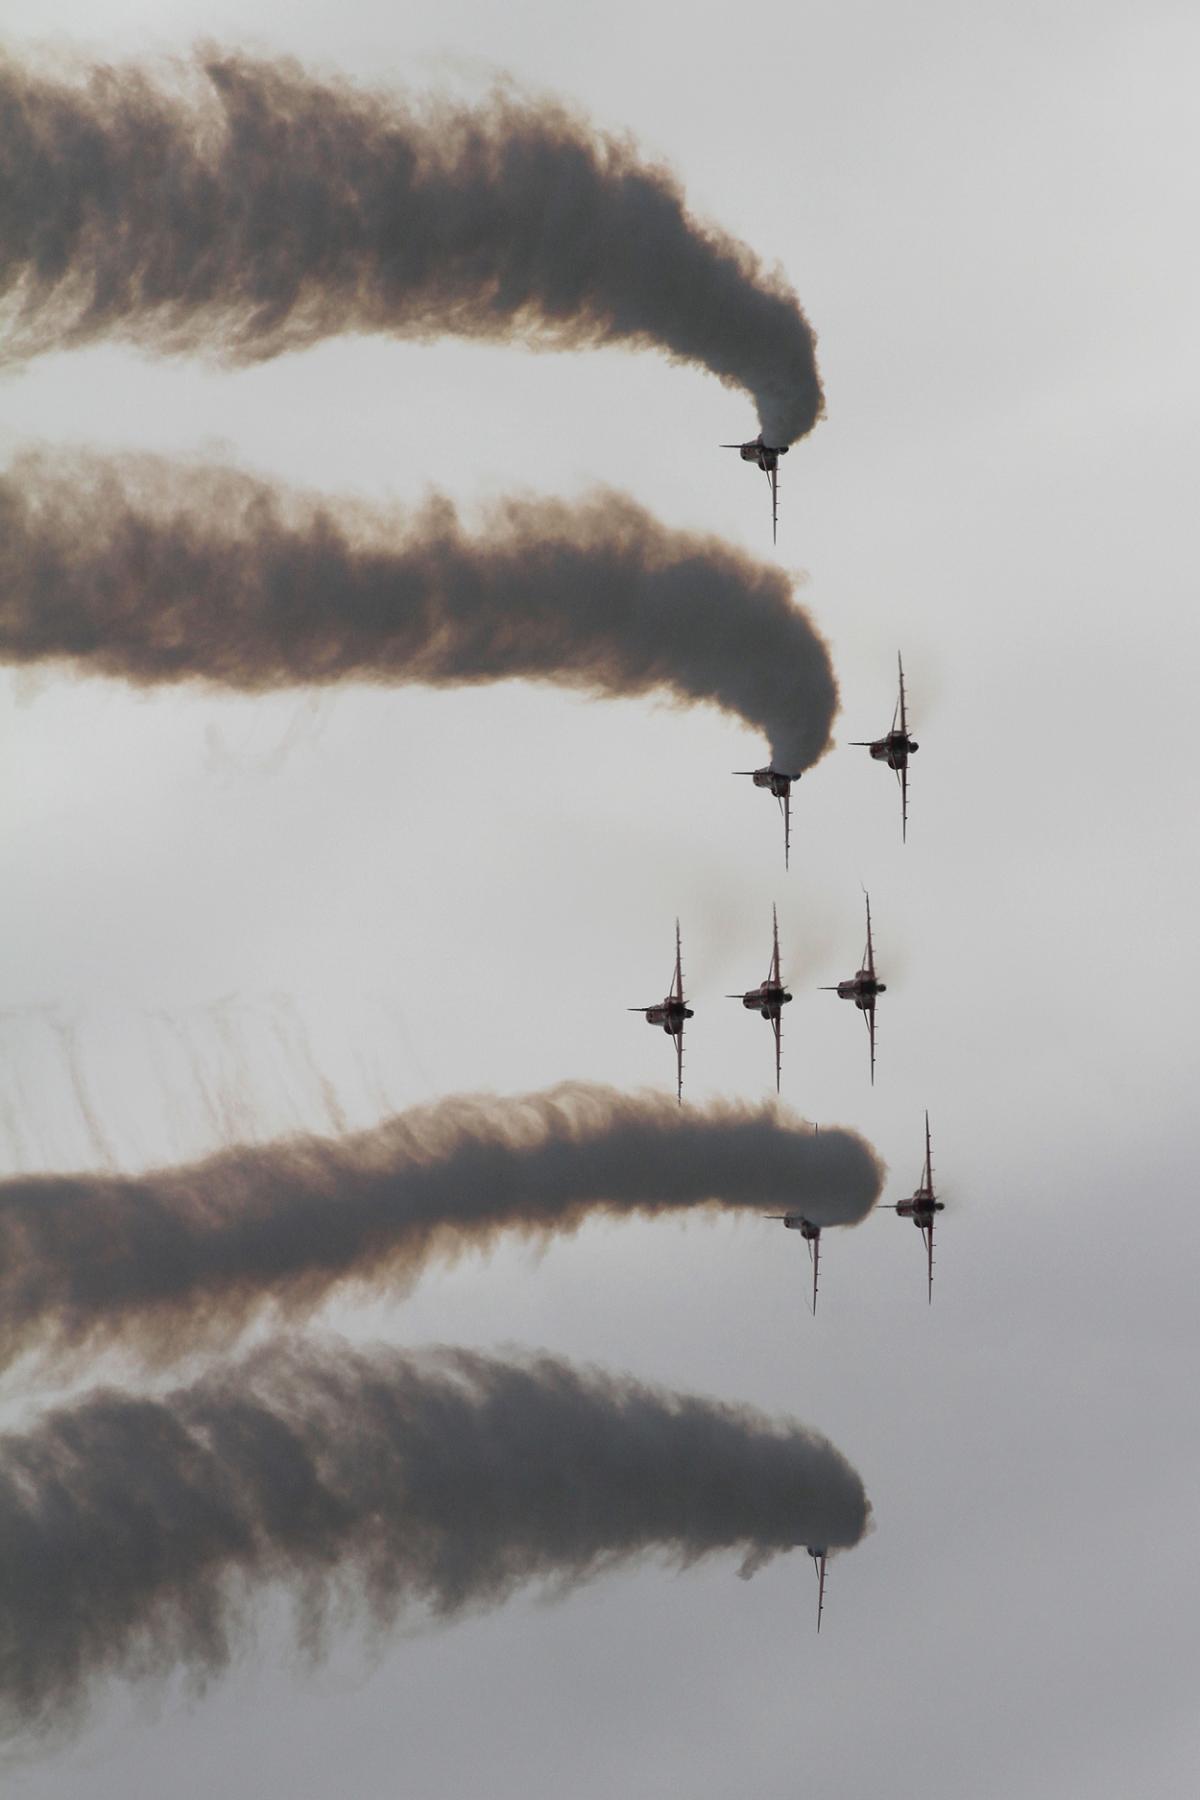 Check out all our pictures from day two of the Bournemouth Air Festival 2014, on Friday, August 29. Photo by Rob Fleming